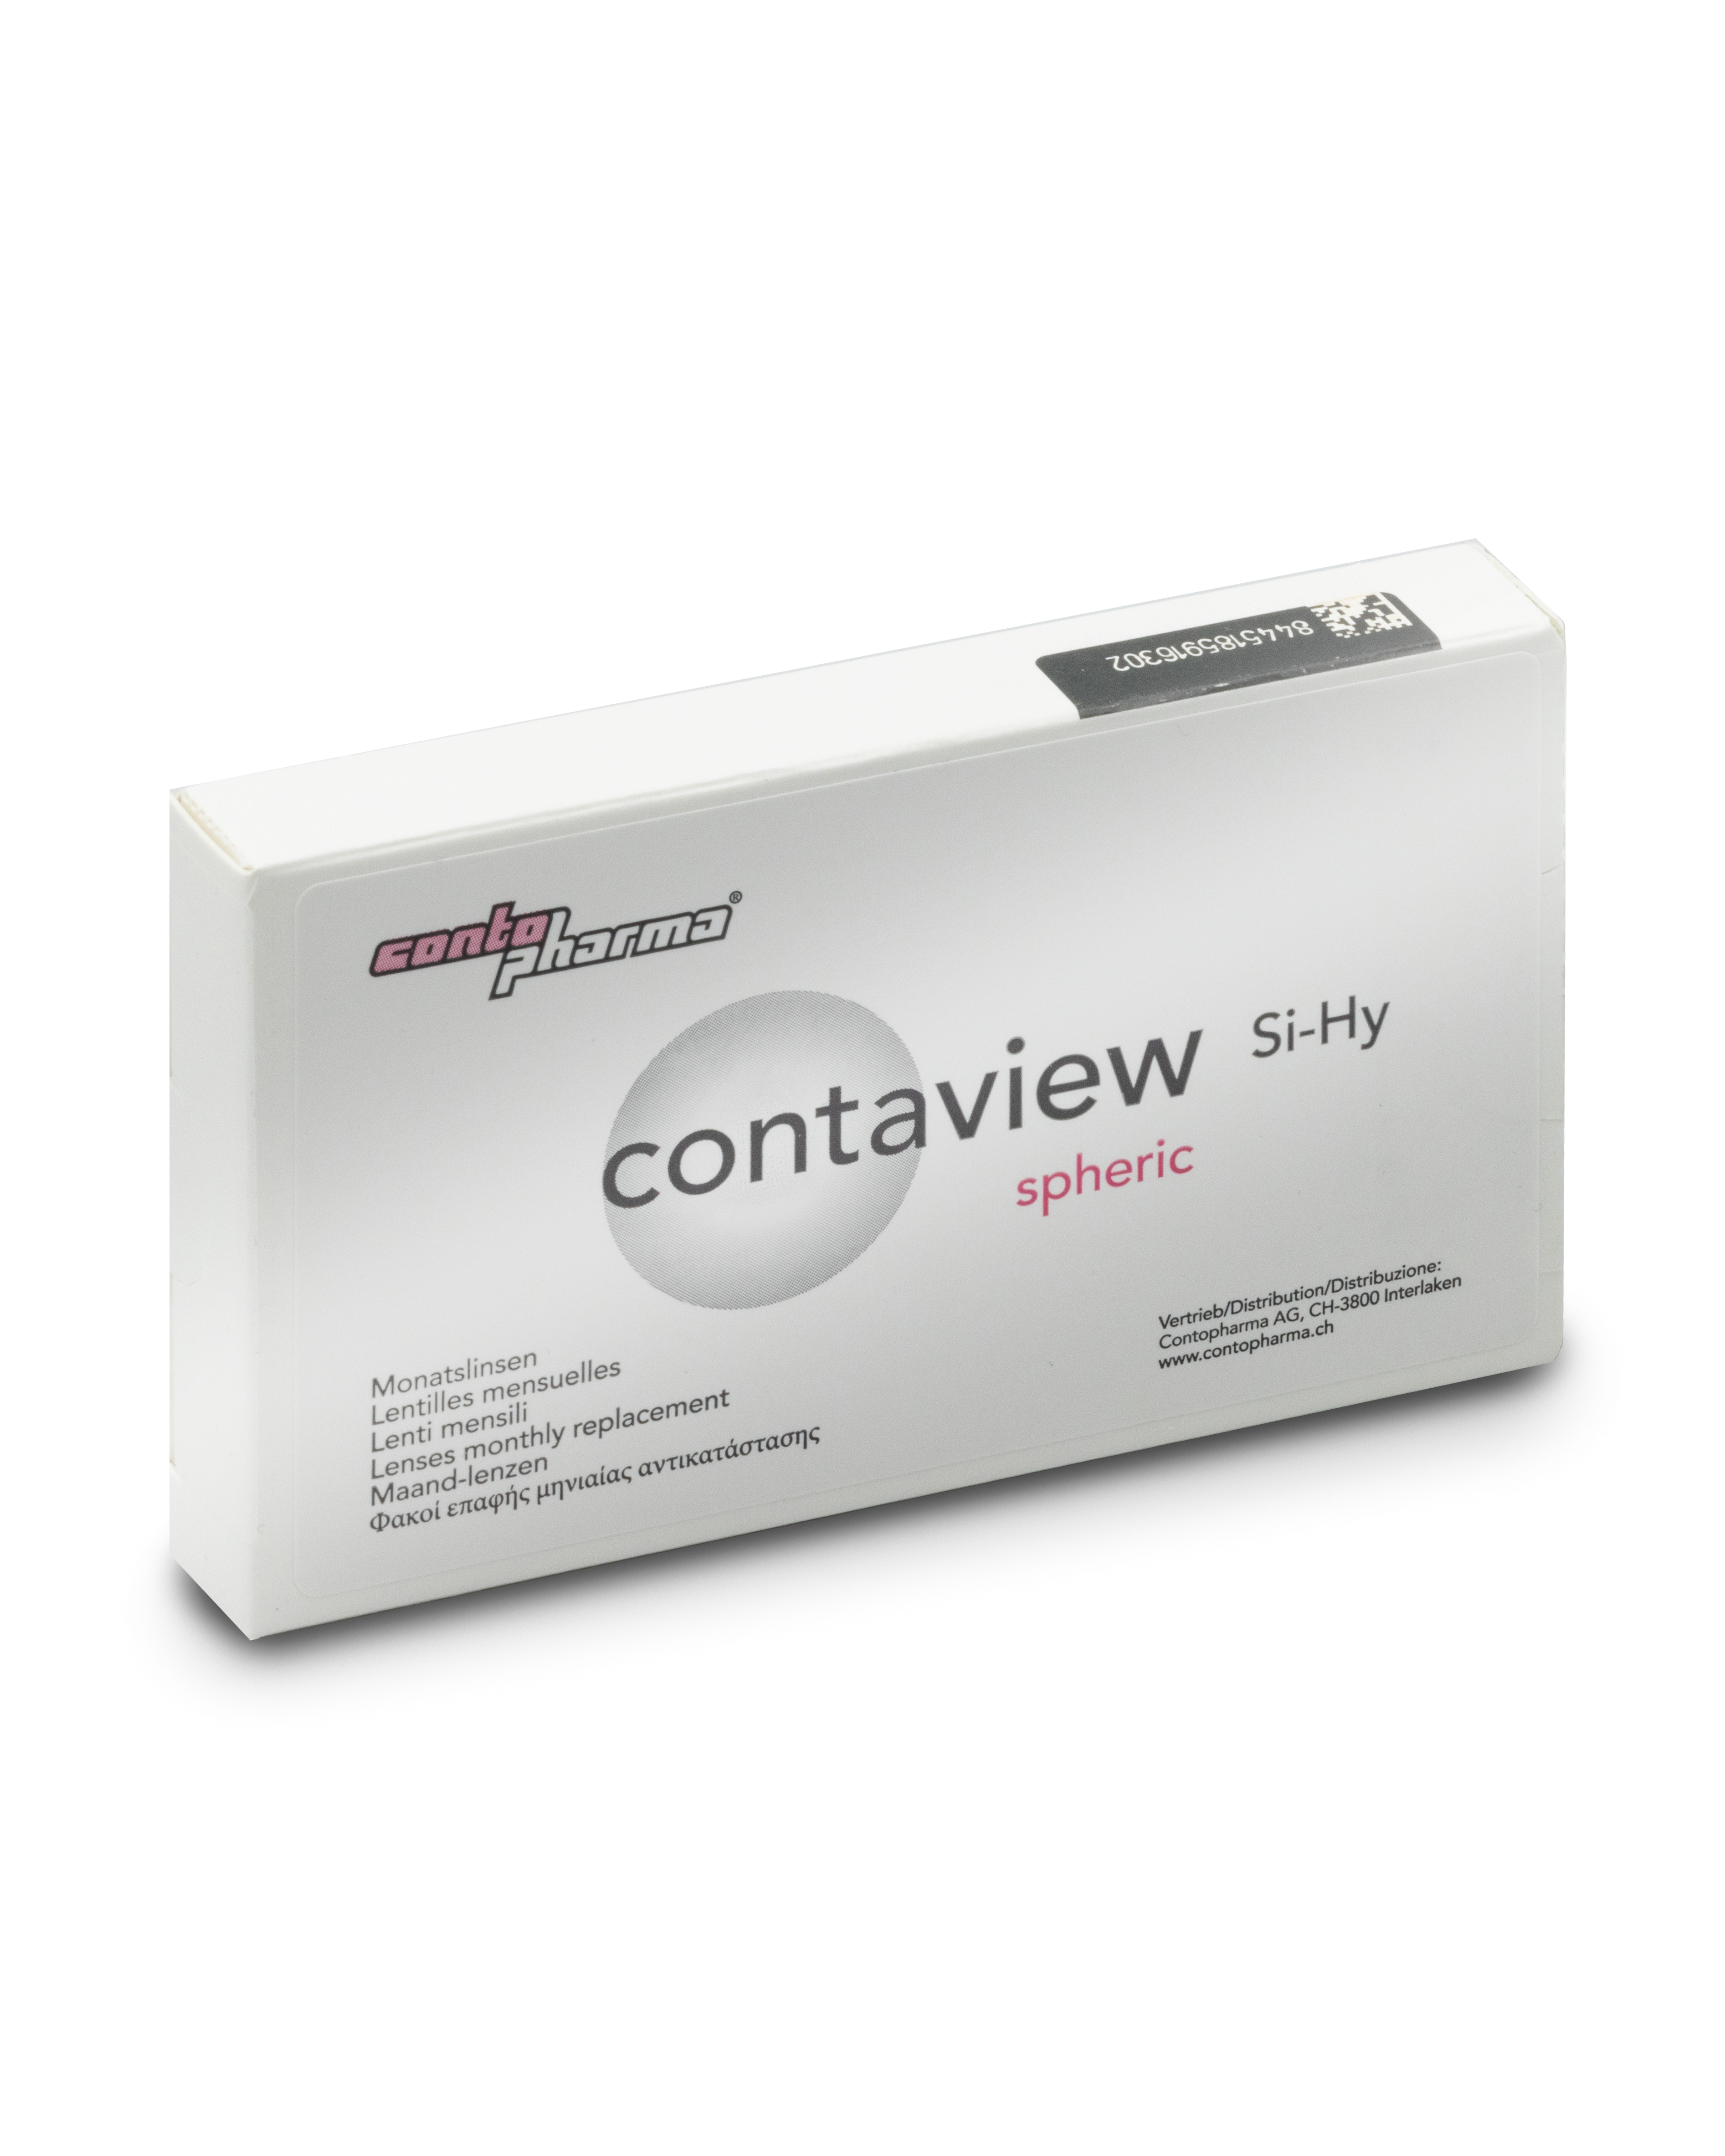 CONTOPHARMA "contaview Si-Hy spheric"